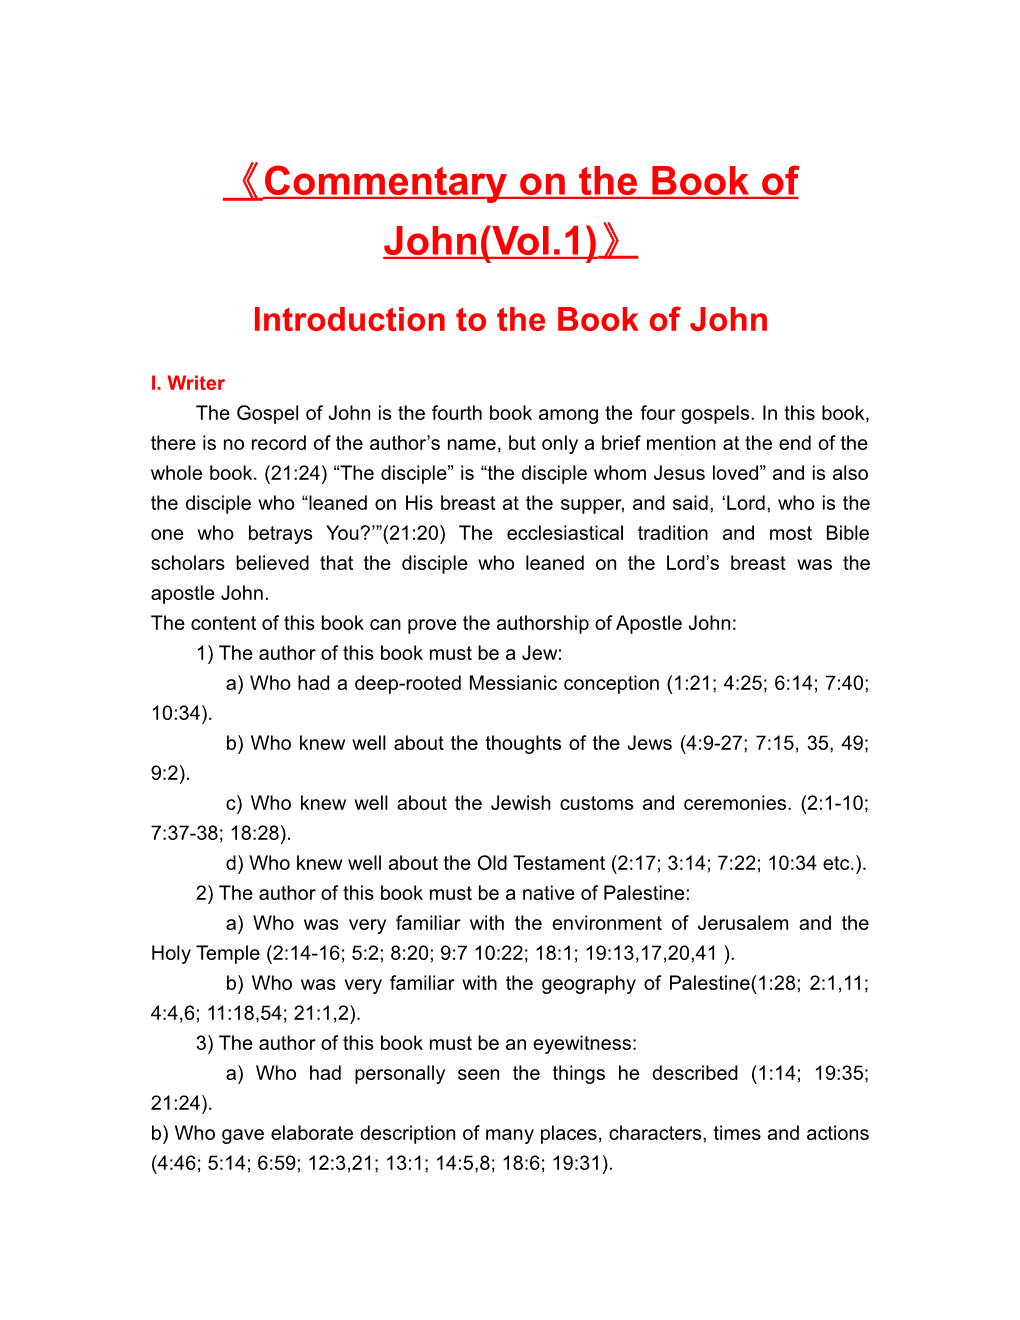 Commentary on the Book of John(Vol.1)